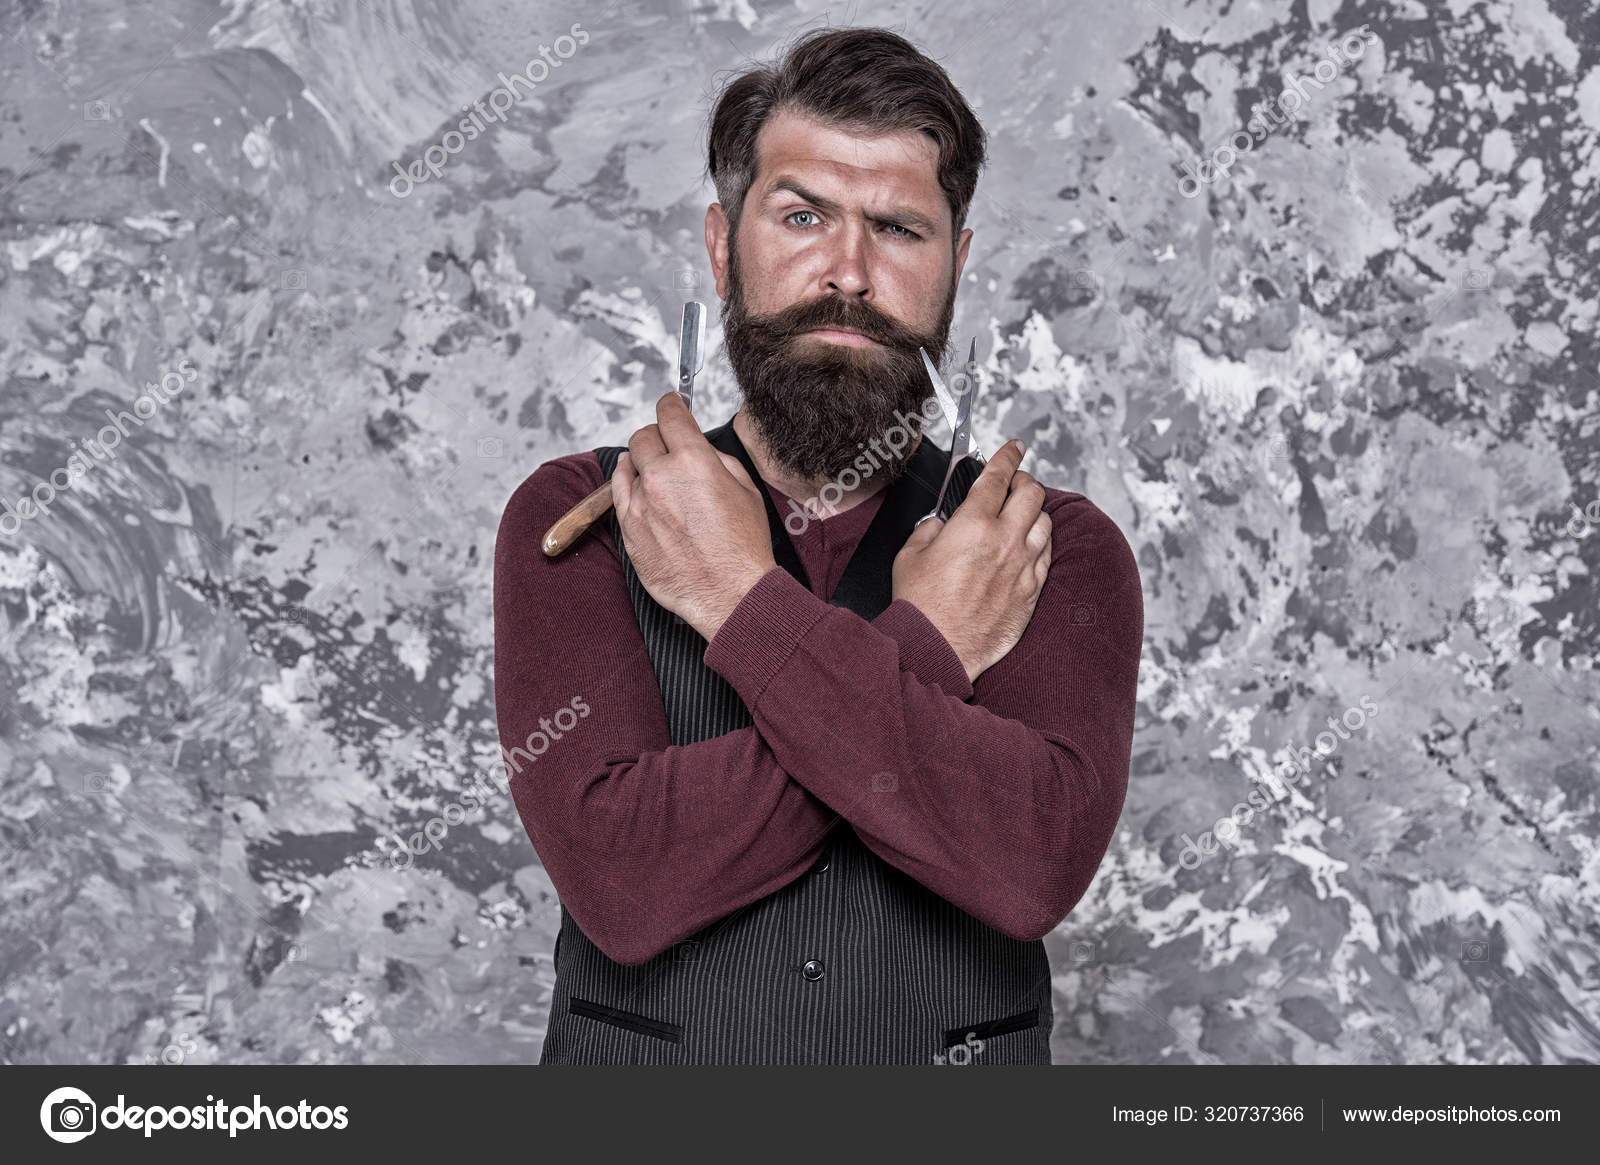 9. "How to maintain and care for long blonde hair in a lumbersexual style" - wide 4